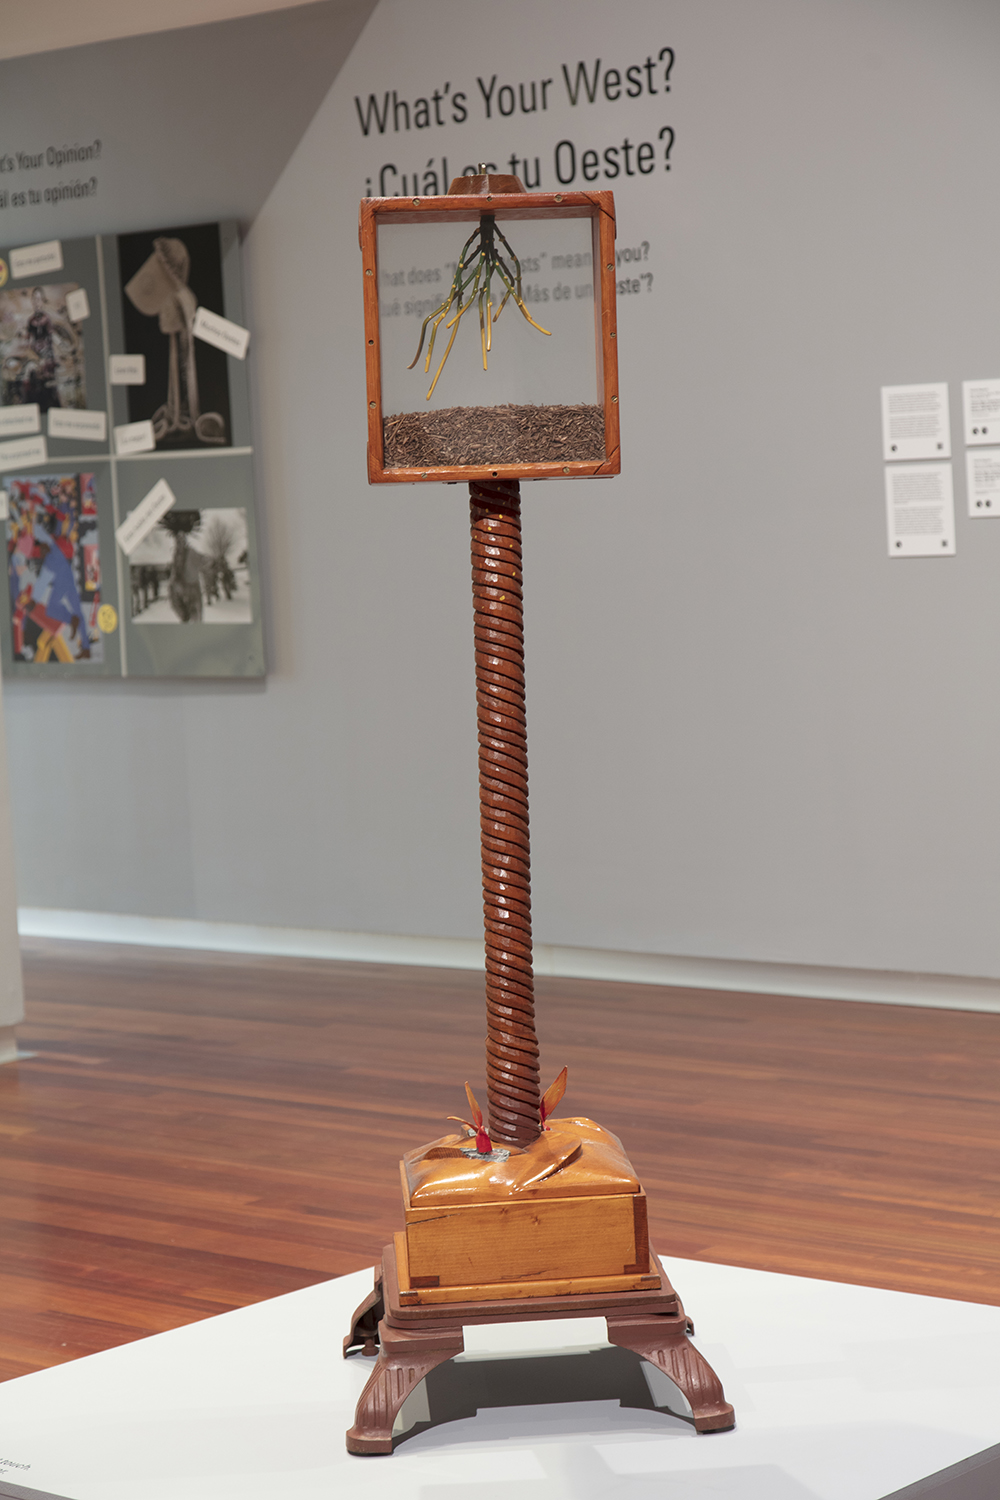 a sculpture made wooded pedestal legs with a twisting center pole has a wood framed glass box on the top containing sclupted roots in green and yellow hanging above a pile of woodchips